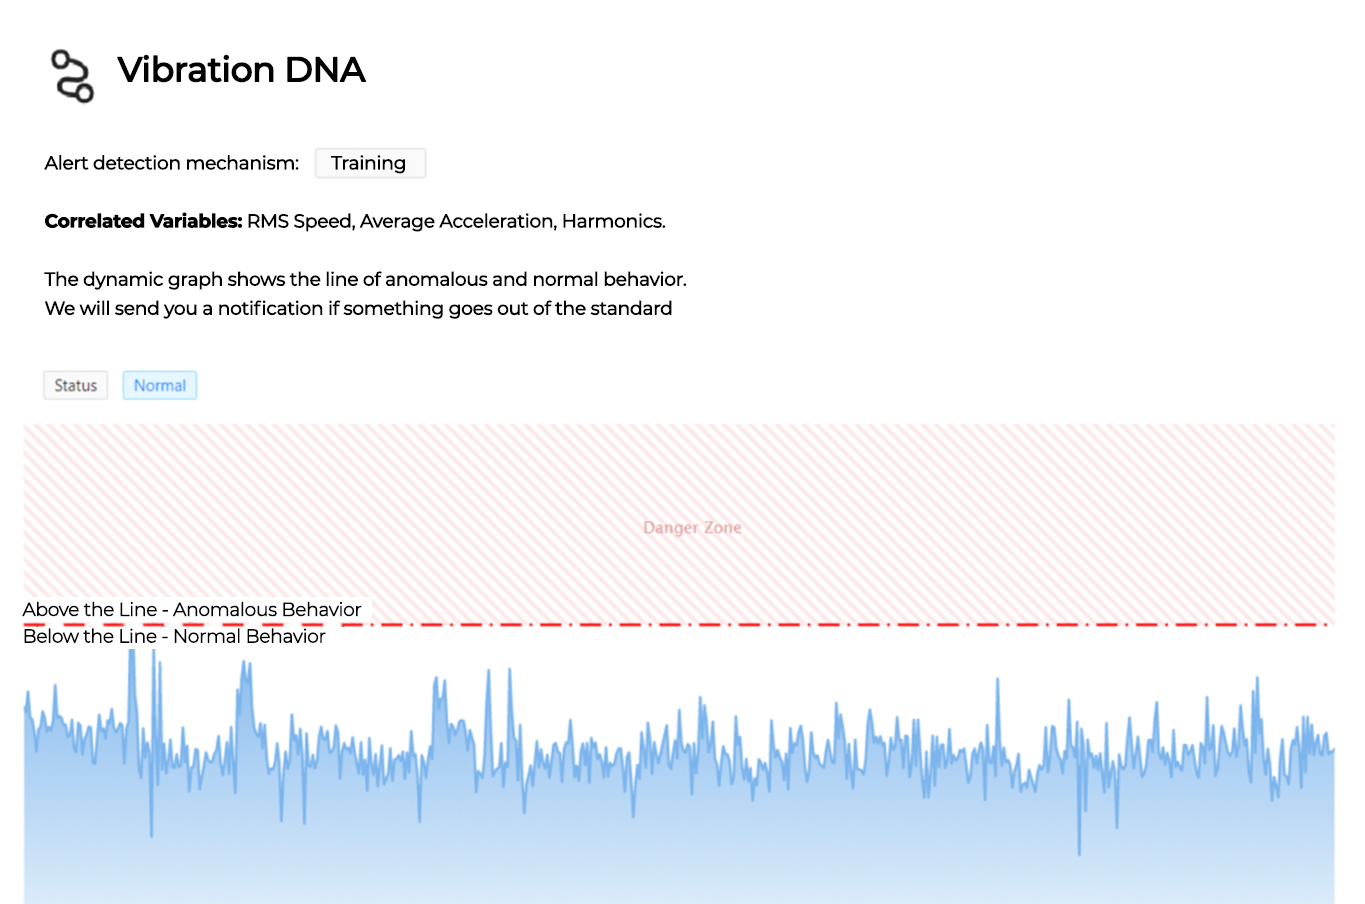 Vibration DNA, the first vibration notification generated by the platform.